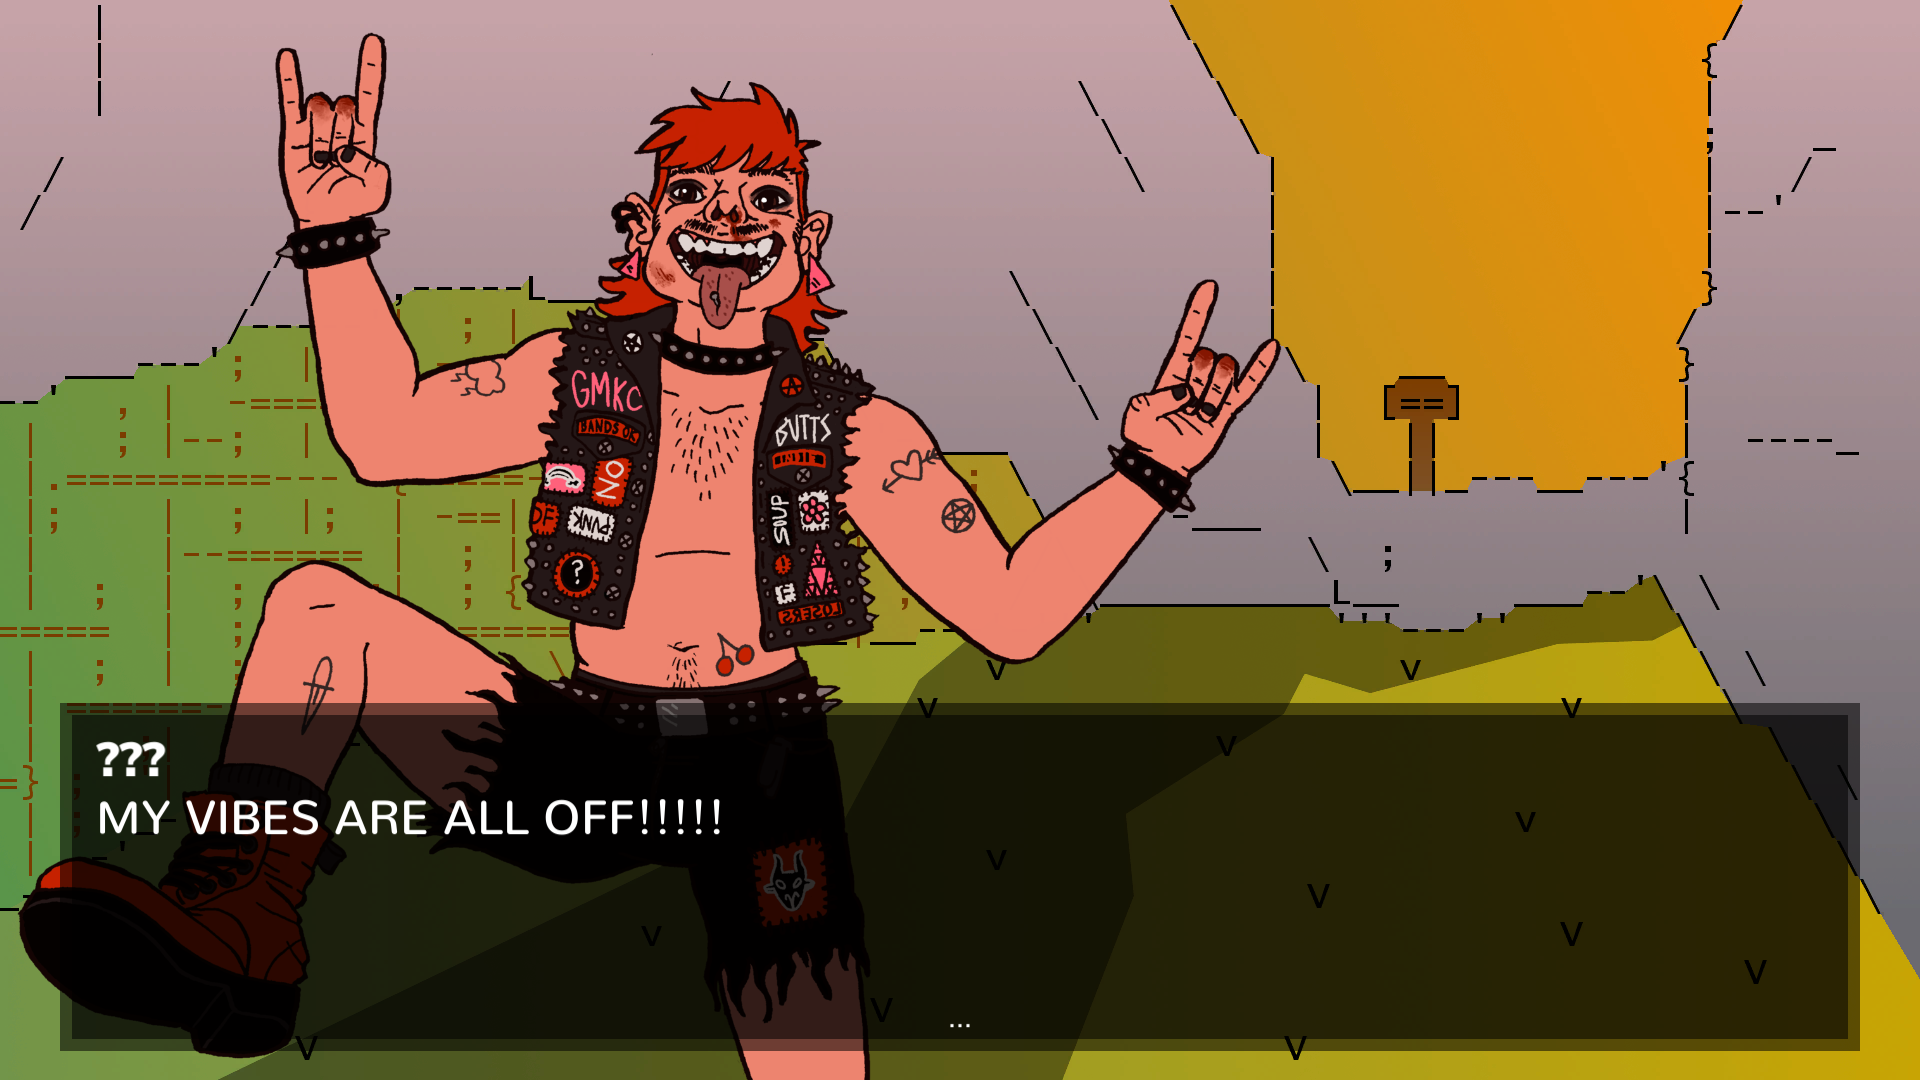 Pictured: A shirtless punk rocker (He/him) in cutoff jean shorts and a vest covered in band patches is screaming, "MY VIBES ARE ALL OFF!!!!!" This punk is backlit by the sun setting behind the craggy valley we are standing inside.